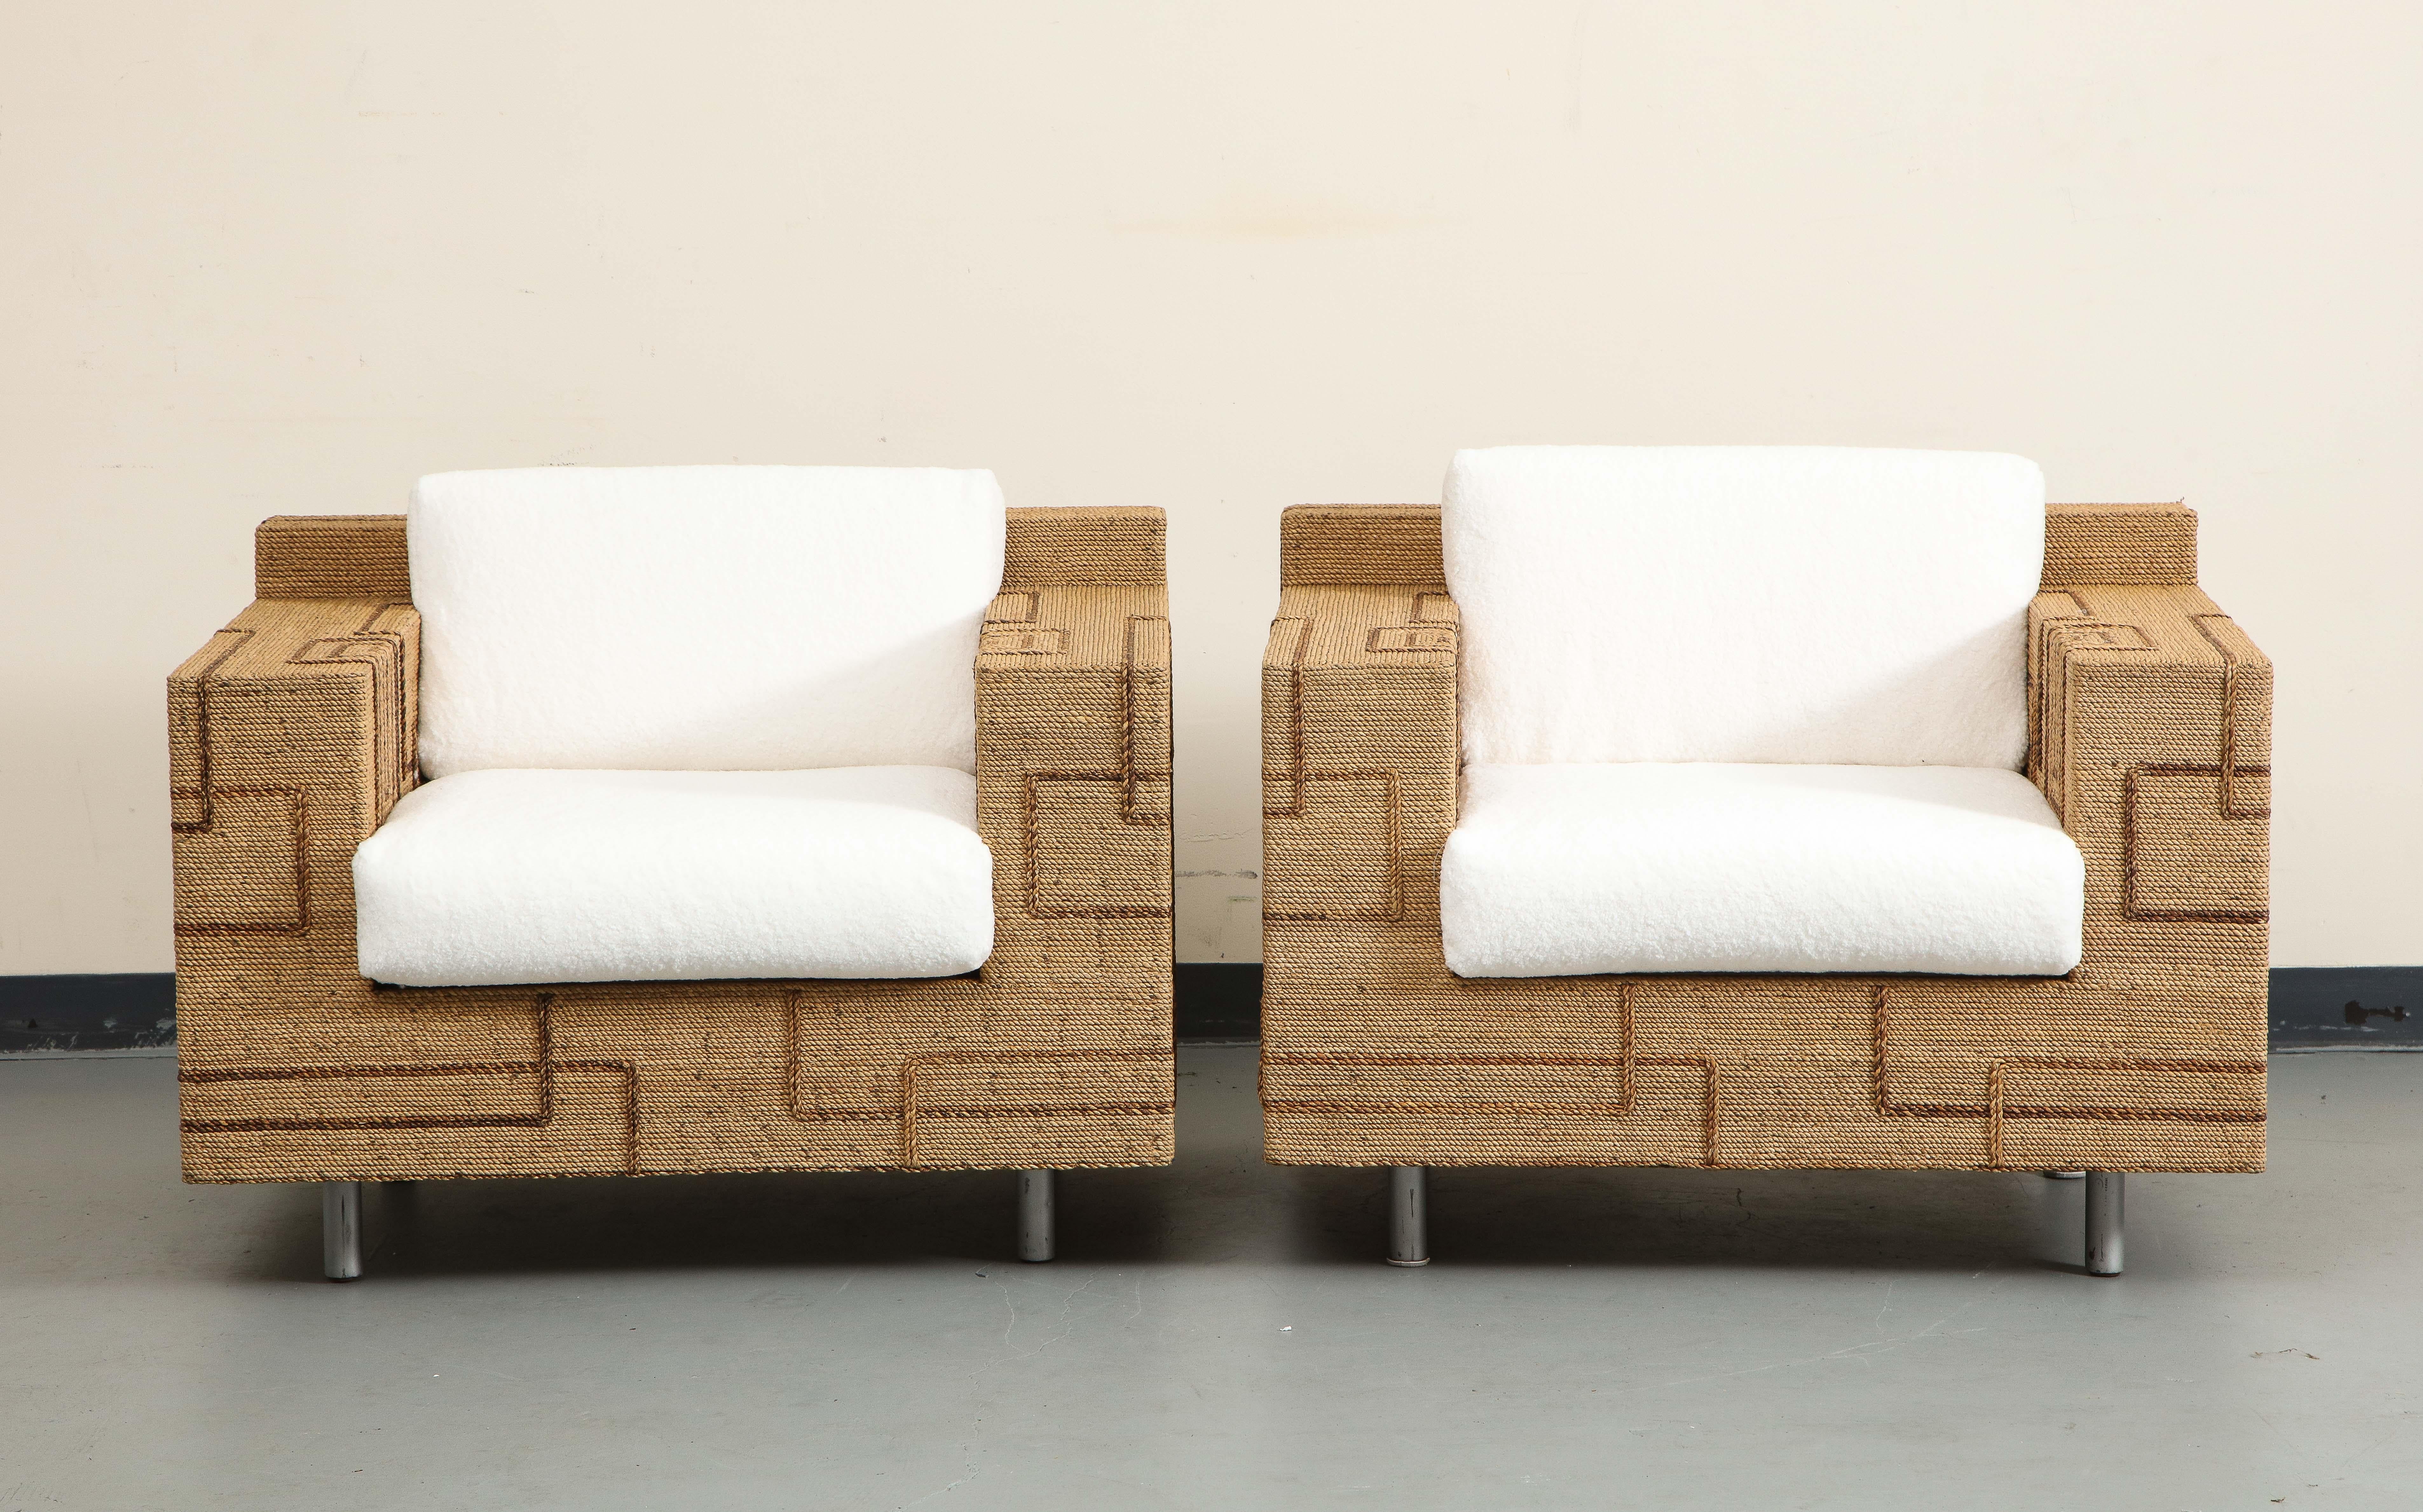 A pair of 1970s Italian rope-inlaid lounge chairs, with geometric line patterns in a contrasting color. Oversize square bases sit firmly on cylindrical metal legs. 

The shearling style cushions are newly made; all-new fill and fabric: Pindler